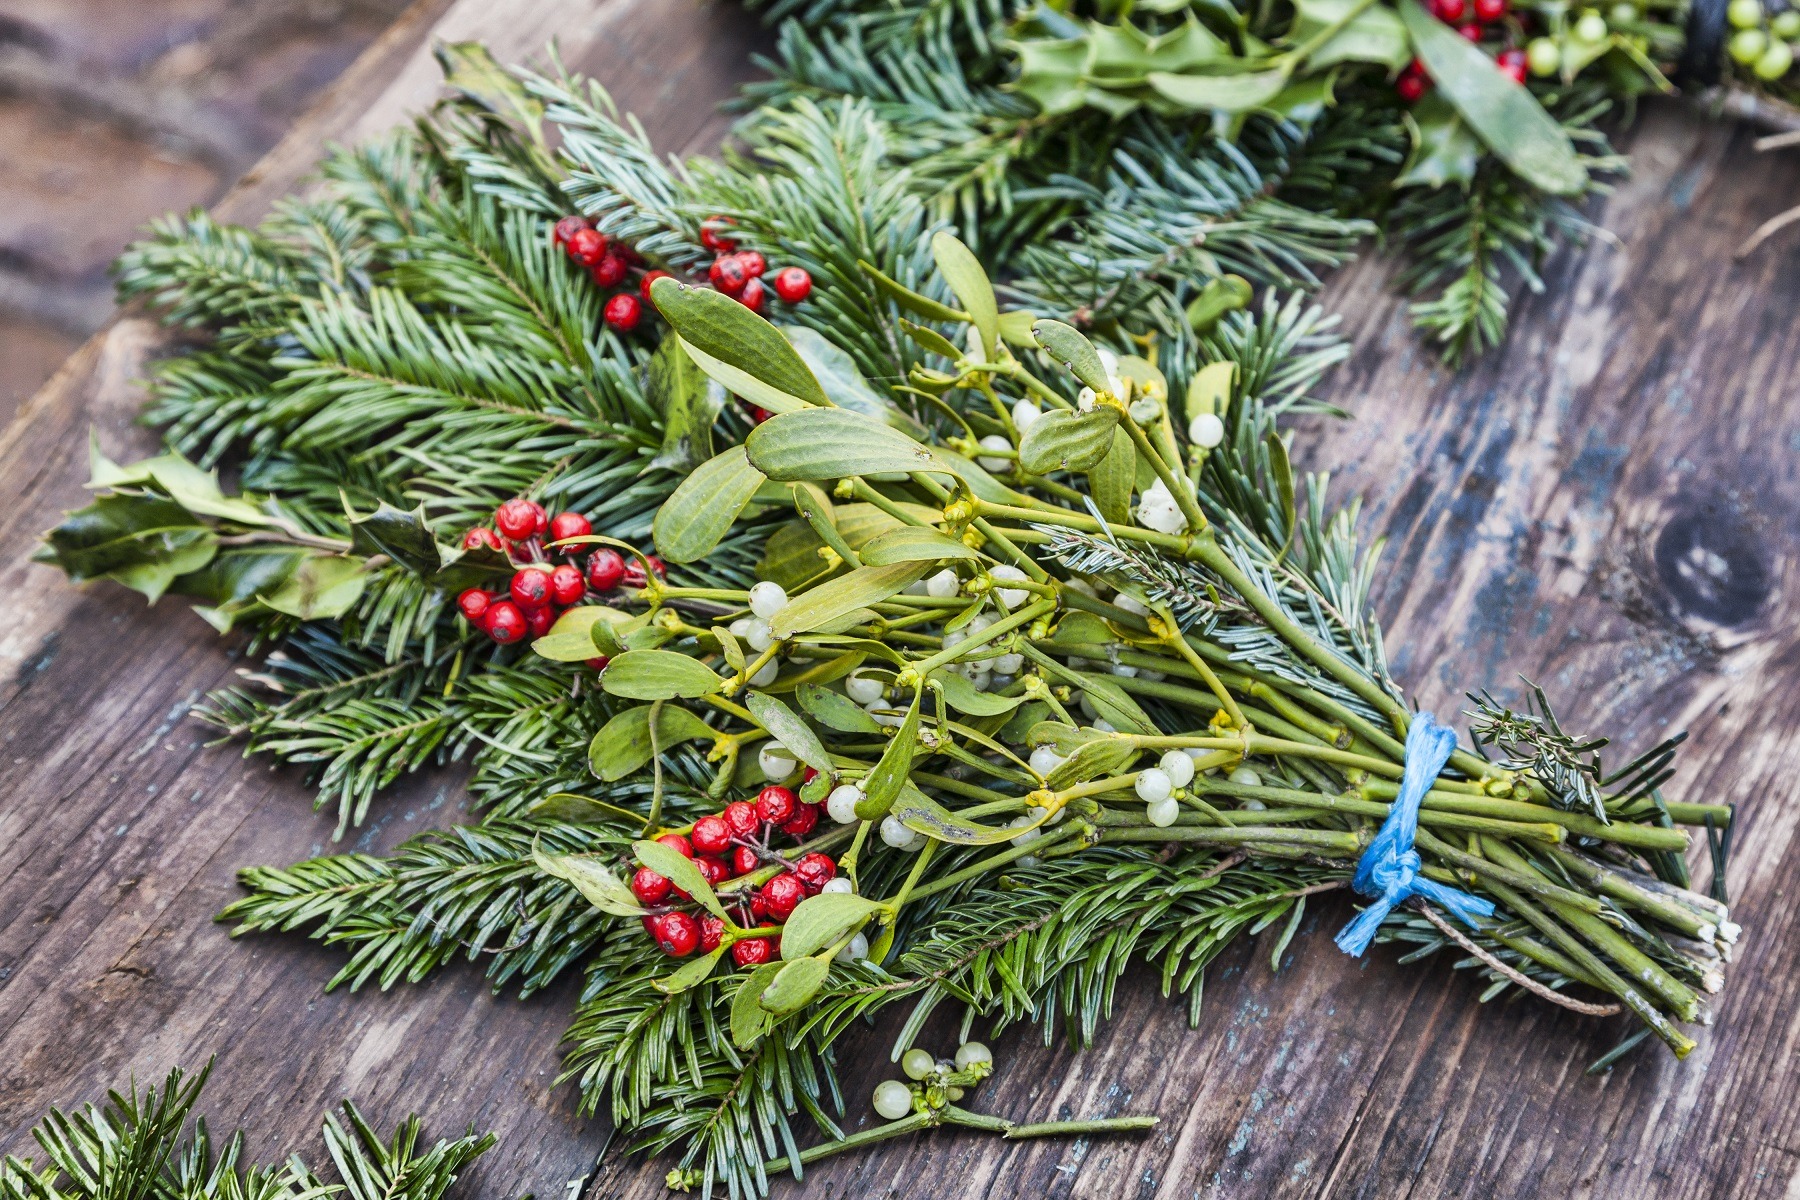 How to Select, Use, and Care for Live Christmas Greenery